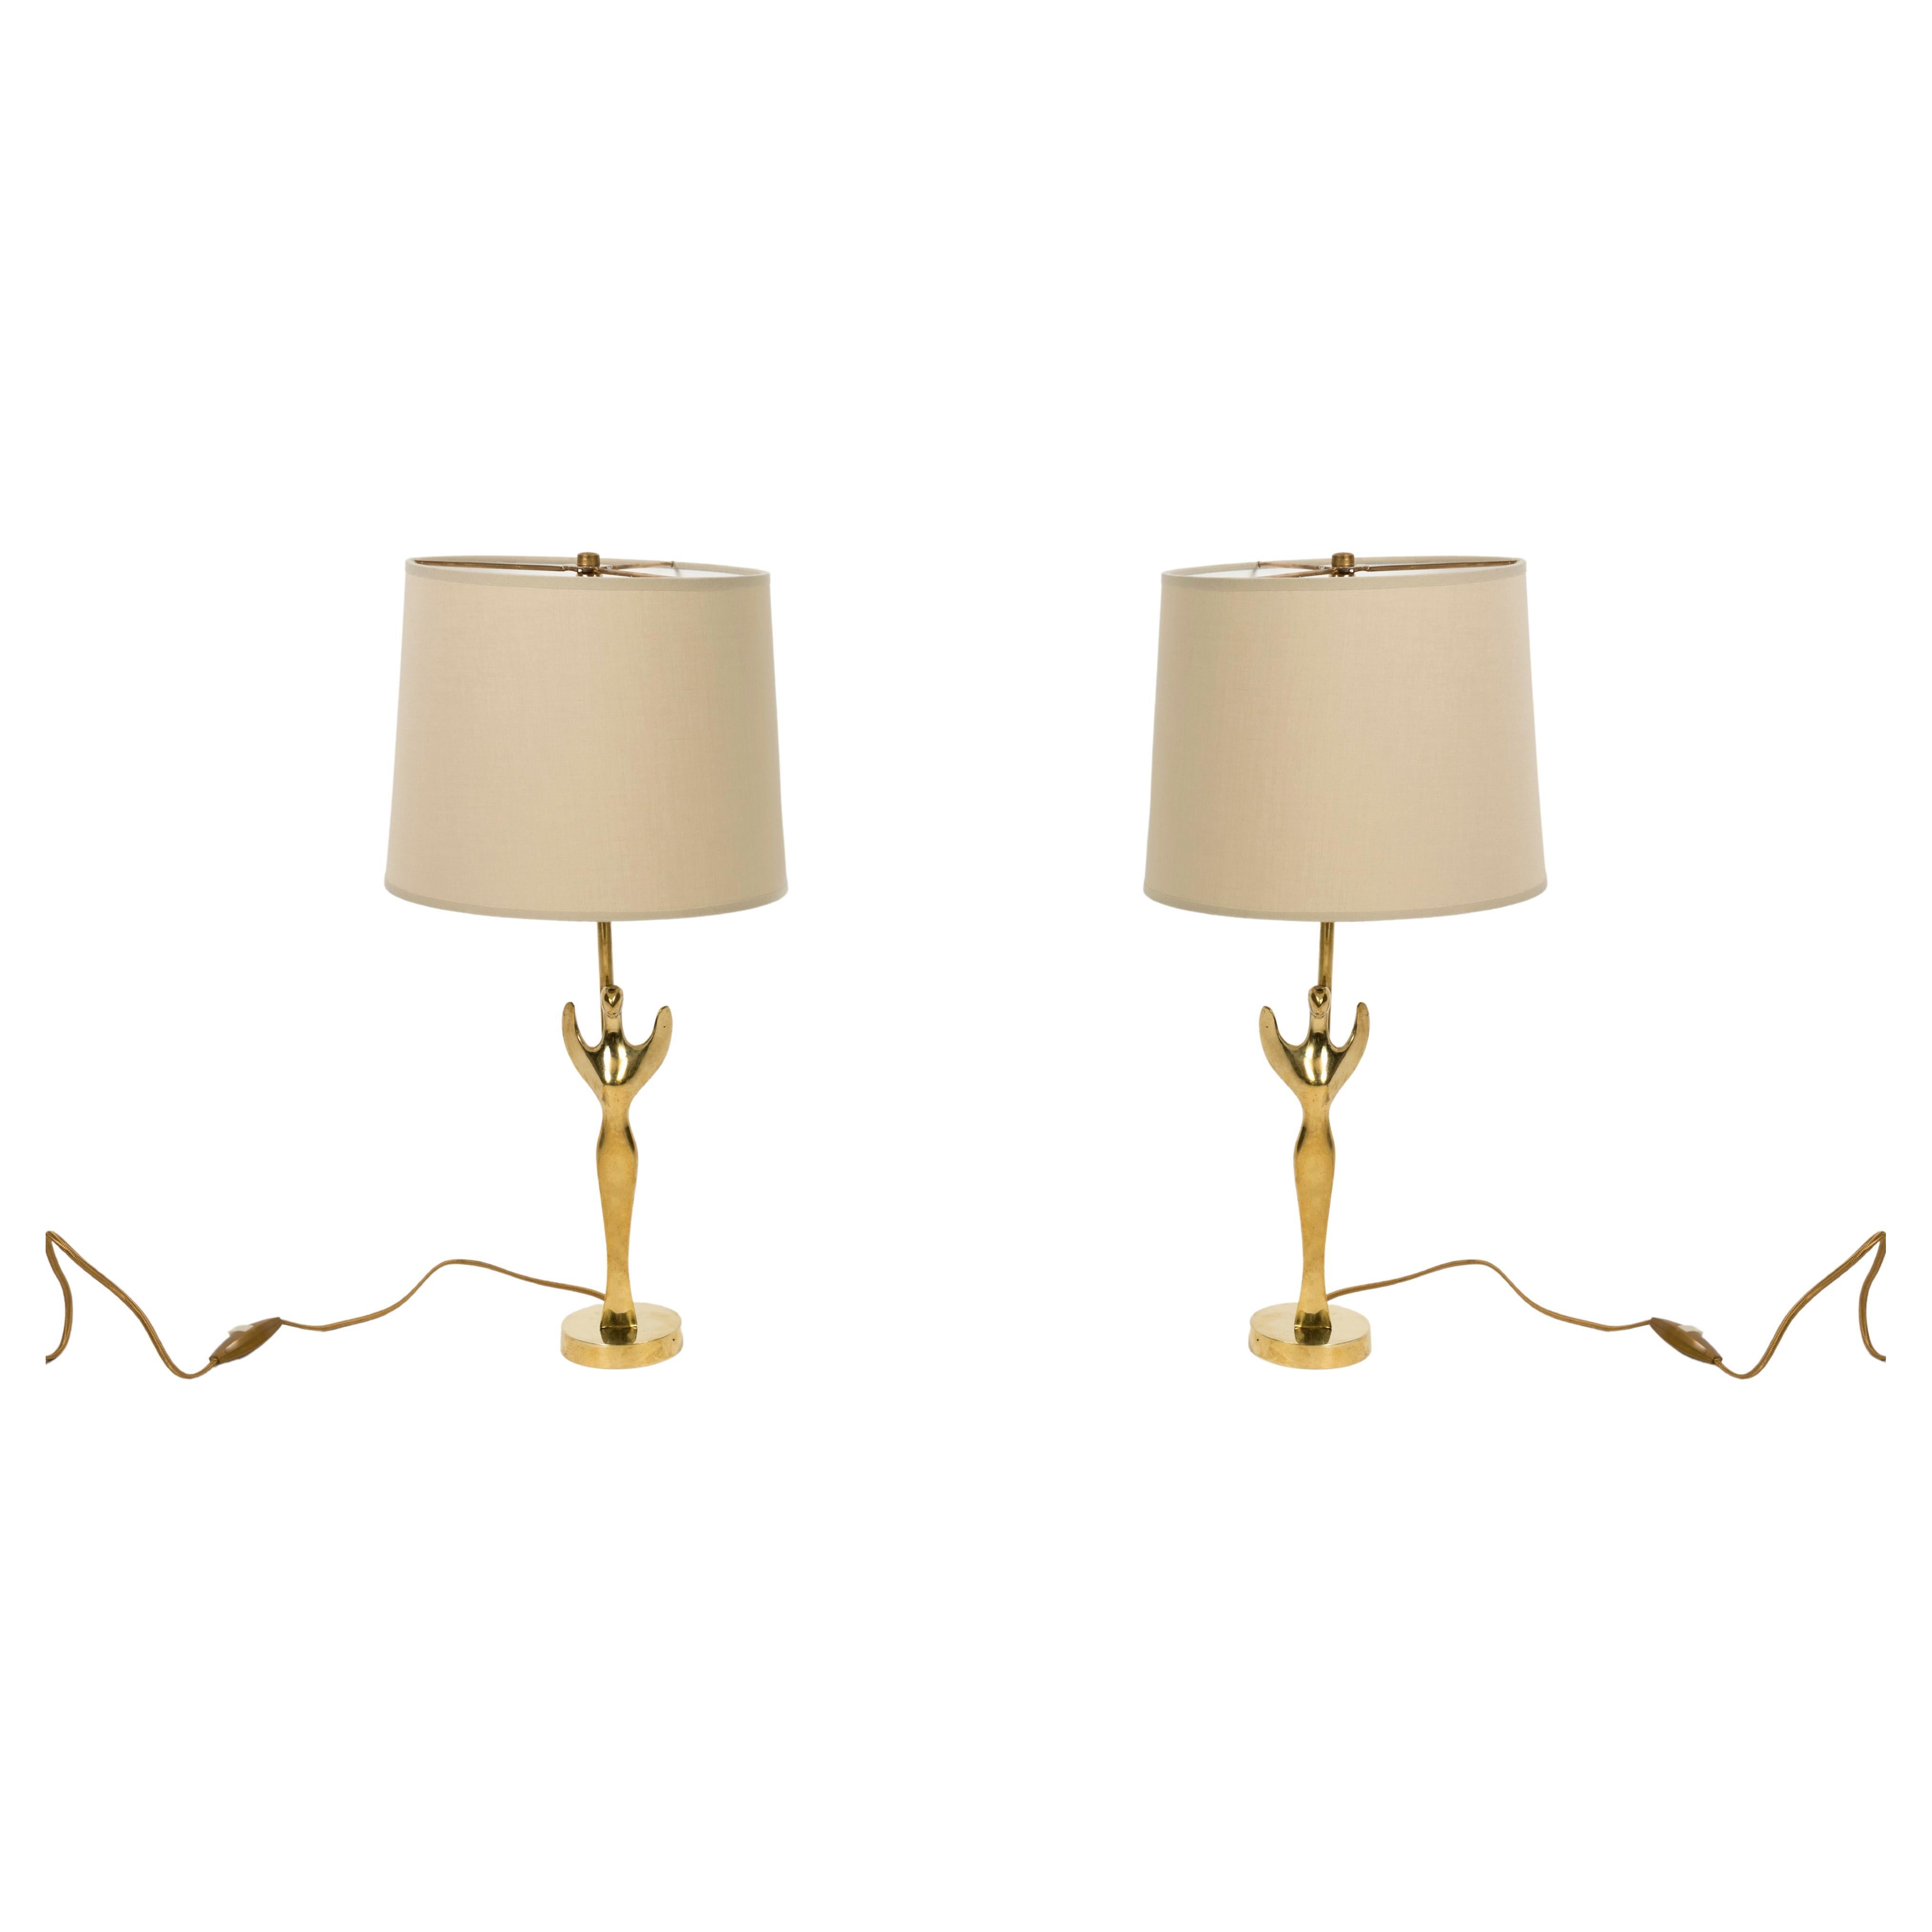 Pair of Polished Bronze "Engel" Table Lamps by Riccardo Scarpa For Sale